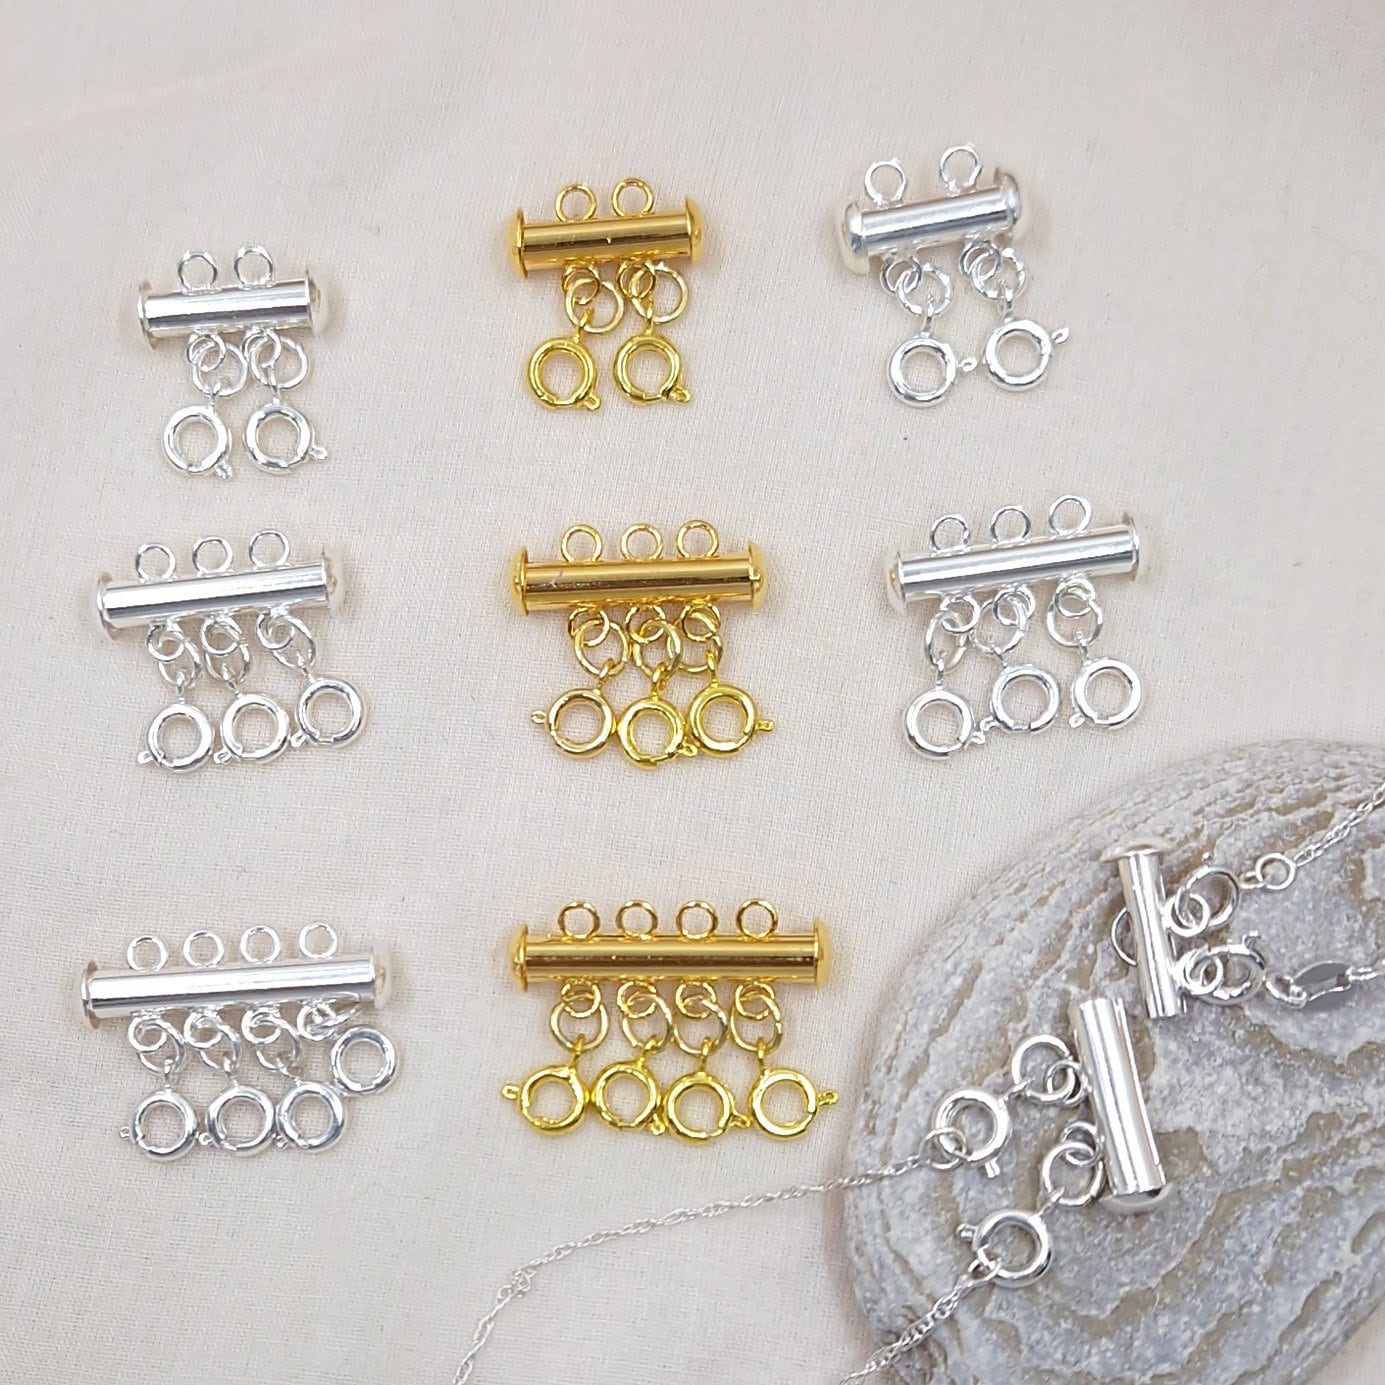 DIY Layered Necklace, Clasp Separating Spacer Sterling Silver, Gold Fill  Extender, Lobster Clasp for Chains and Bracelets Laminijewelry 